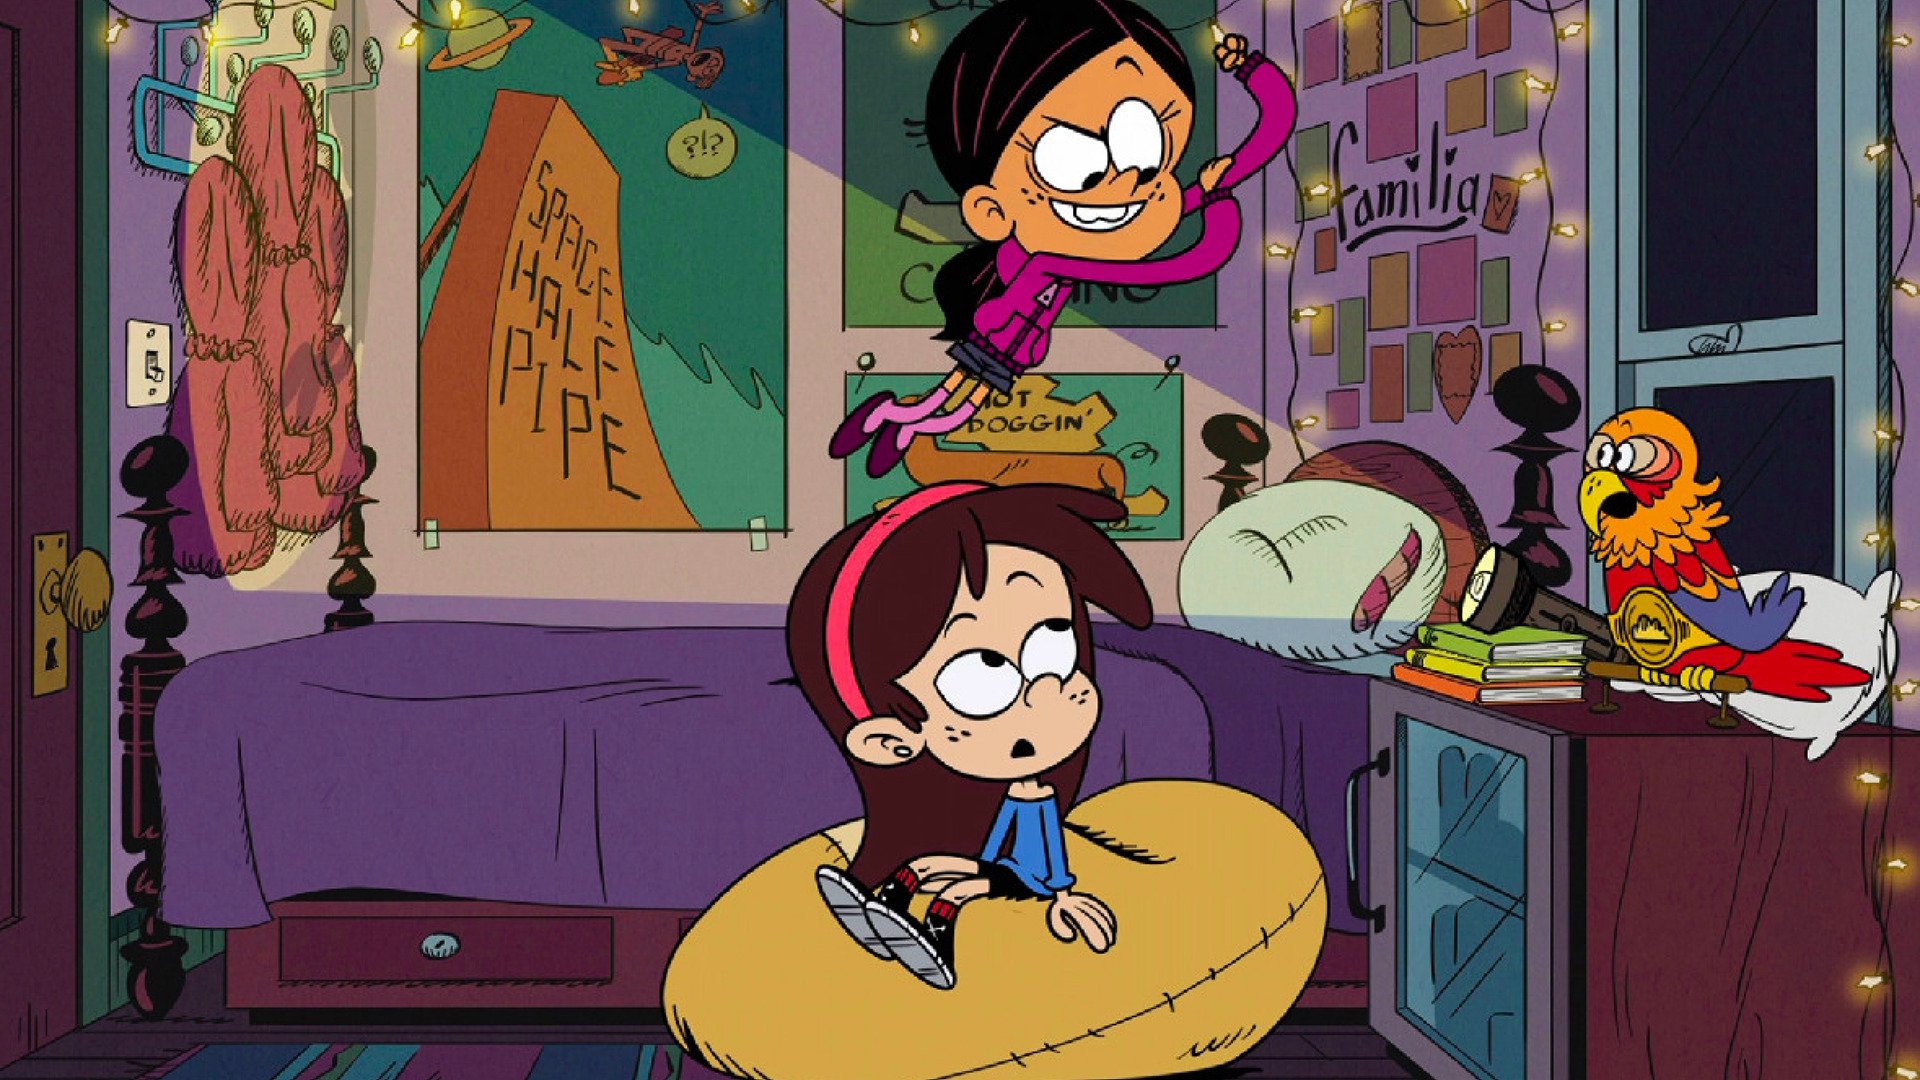 Watch The Loud House Season 4 Episode 5: Store Wars With The Casagrandes Lucha Fever With The Casagrandes Show On Paramount Plus